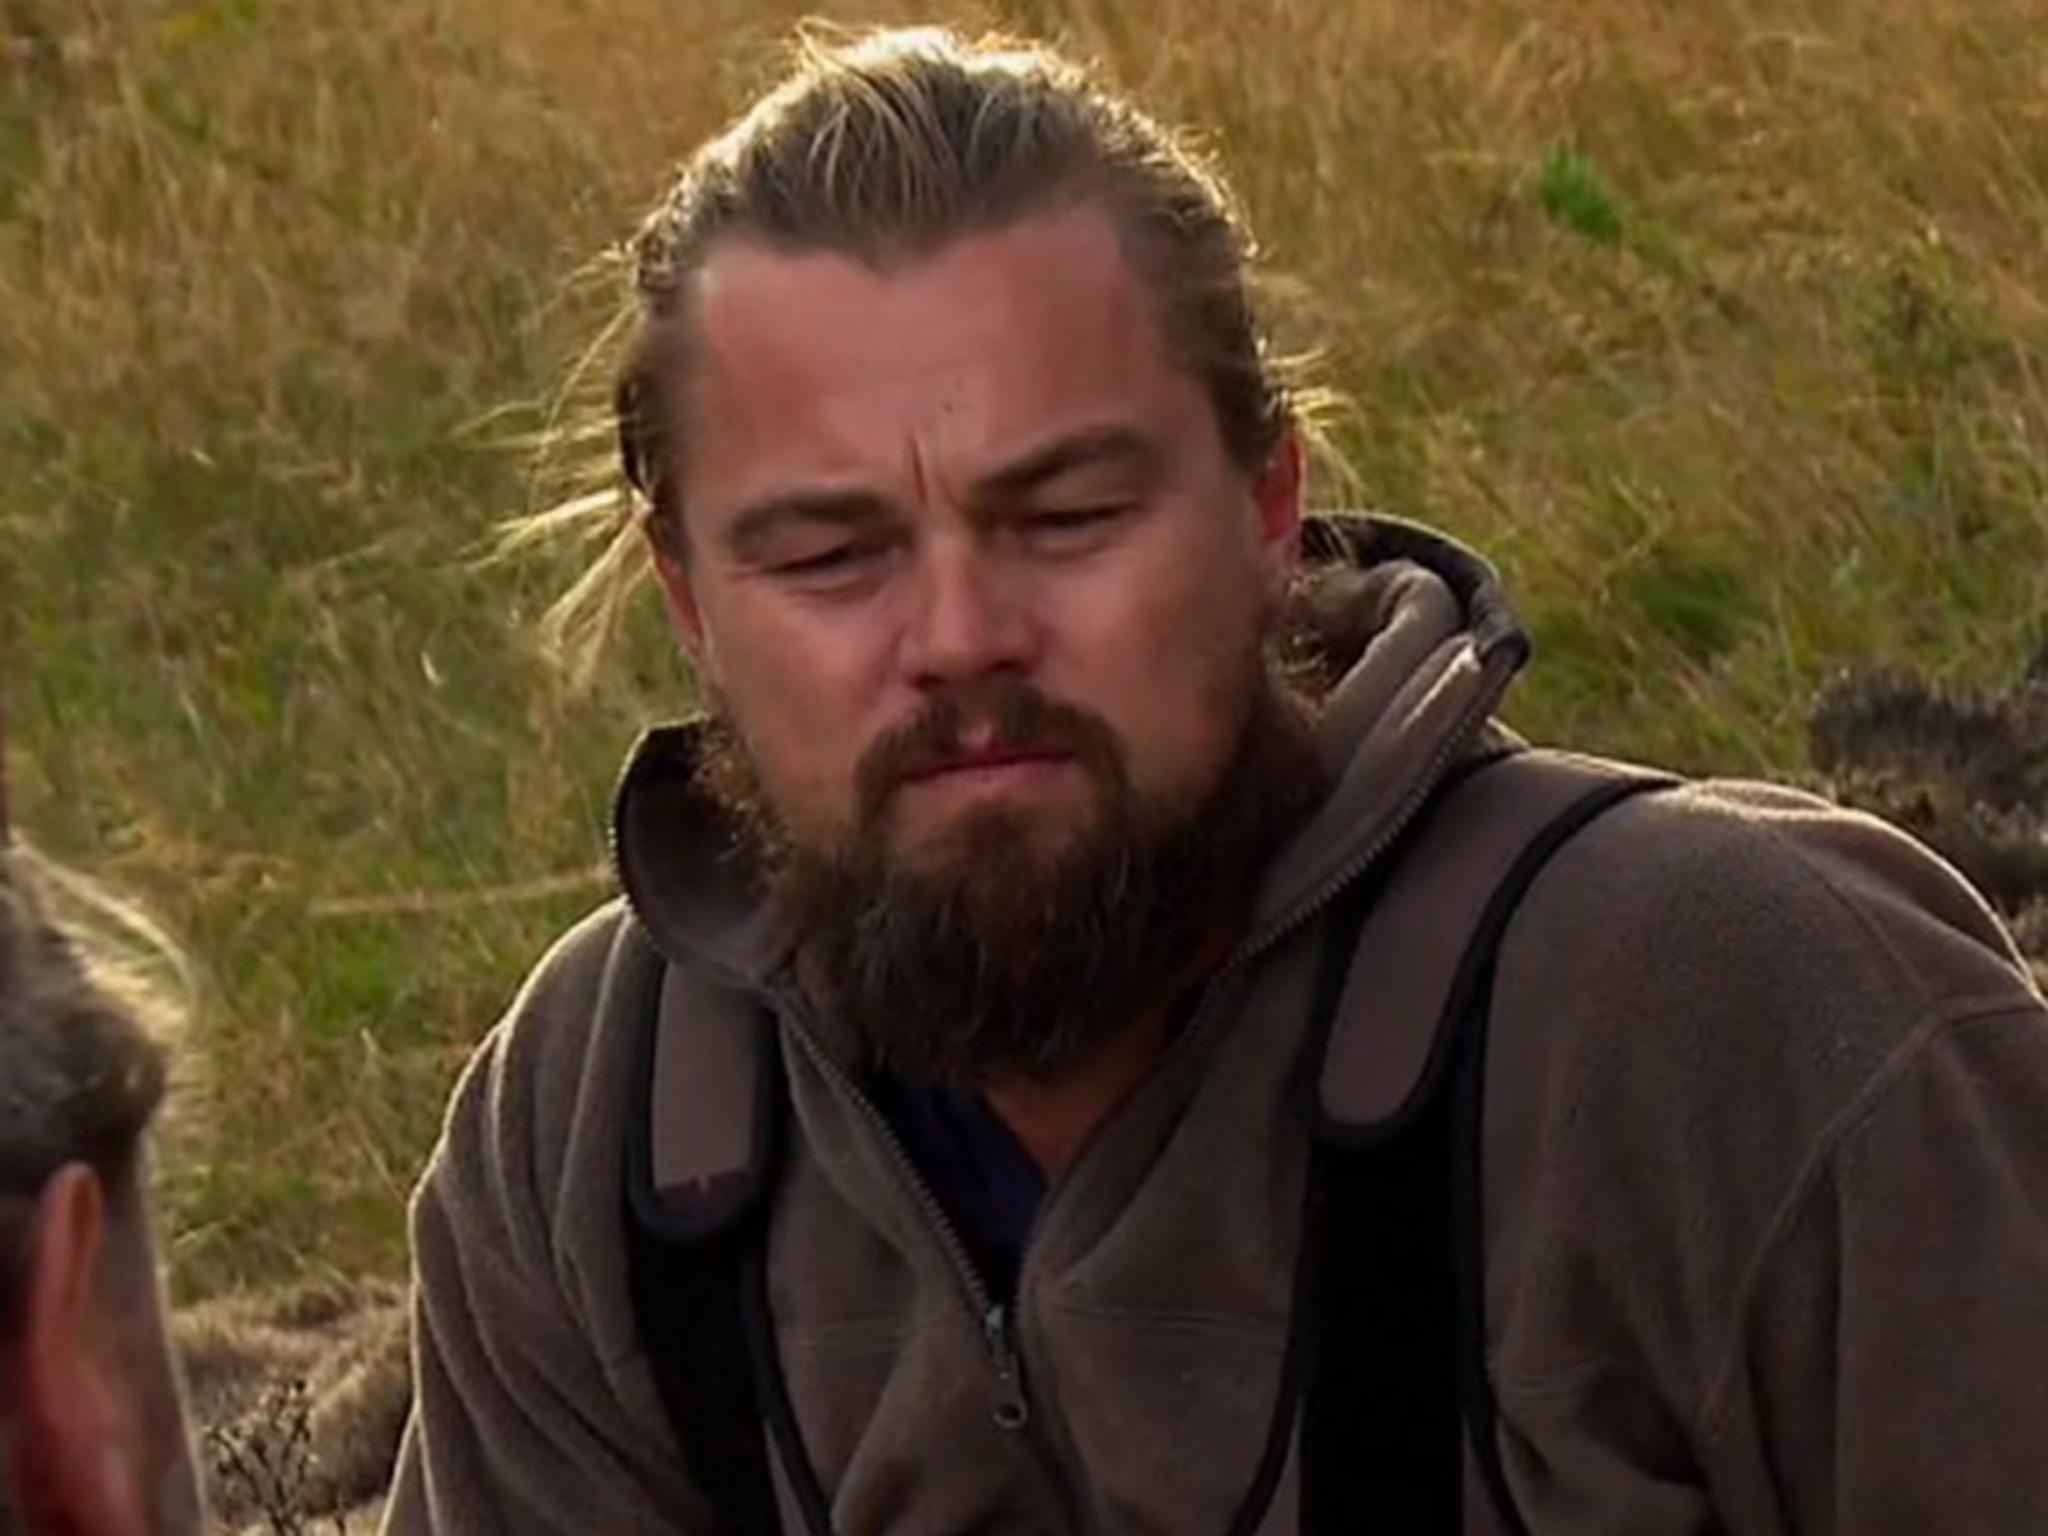 'Before the Flood' follows Leonardo DiCaprio as he chronicles the dangers of climate change